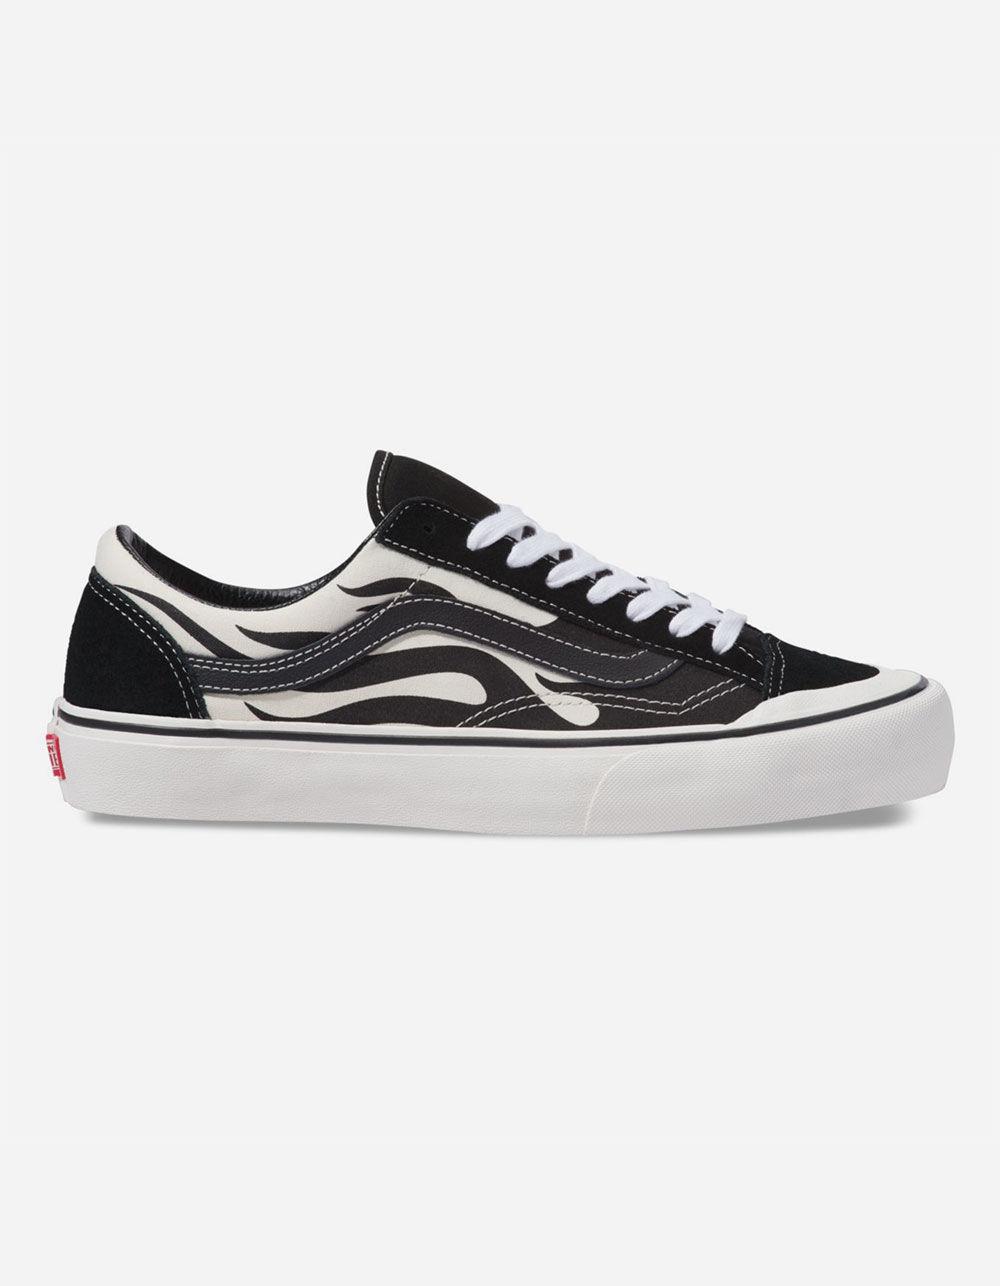 vans flame style 36 sf shoes